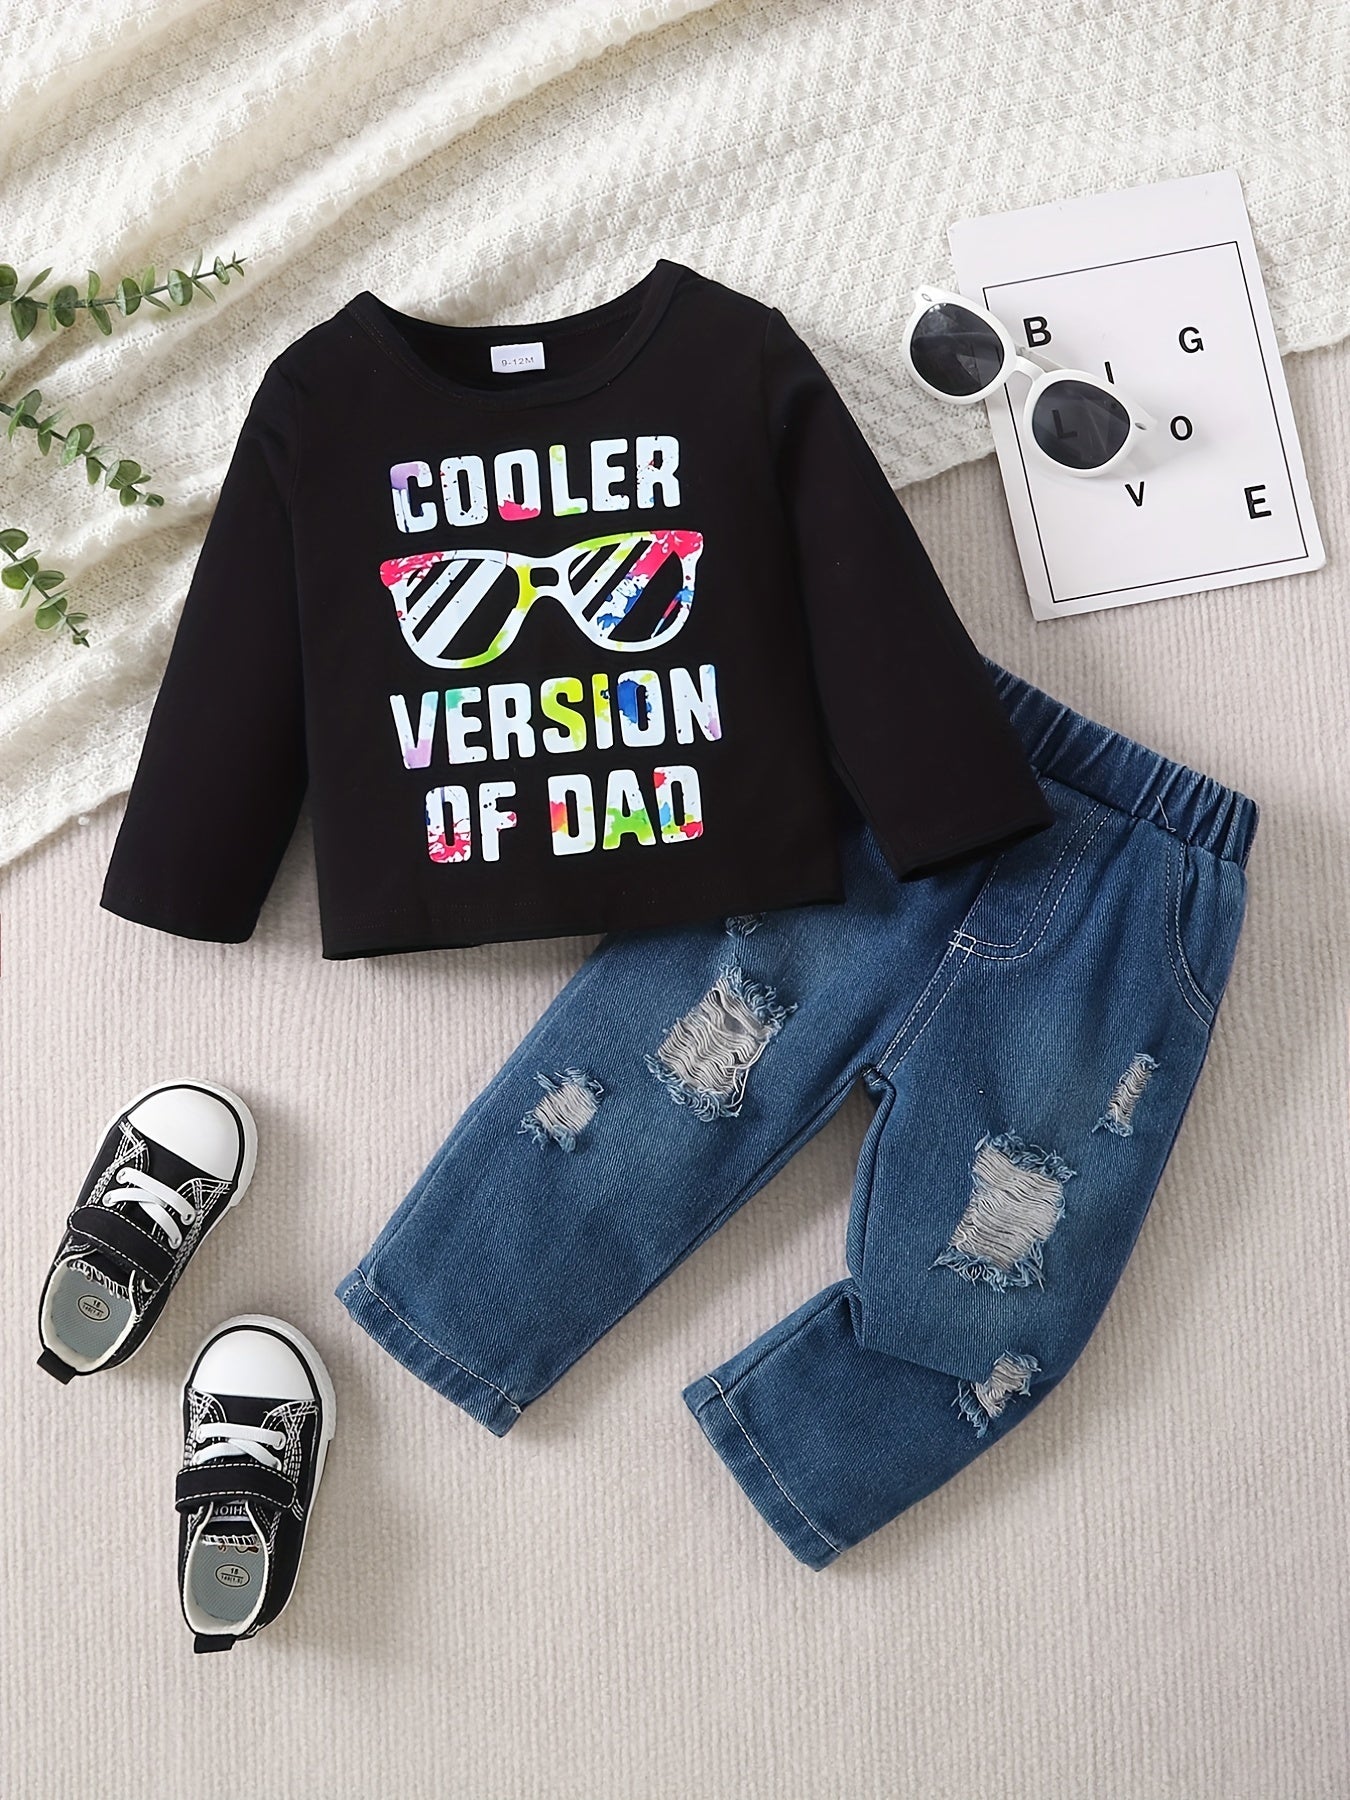 Toddler Baby Boys Trendy Casual Outfit, COOLER VERSION OF DAD Letter Print Long Sleeve Top & Ripped Jeans Set